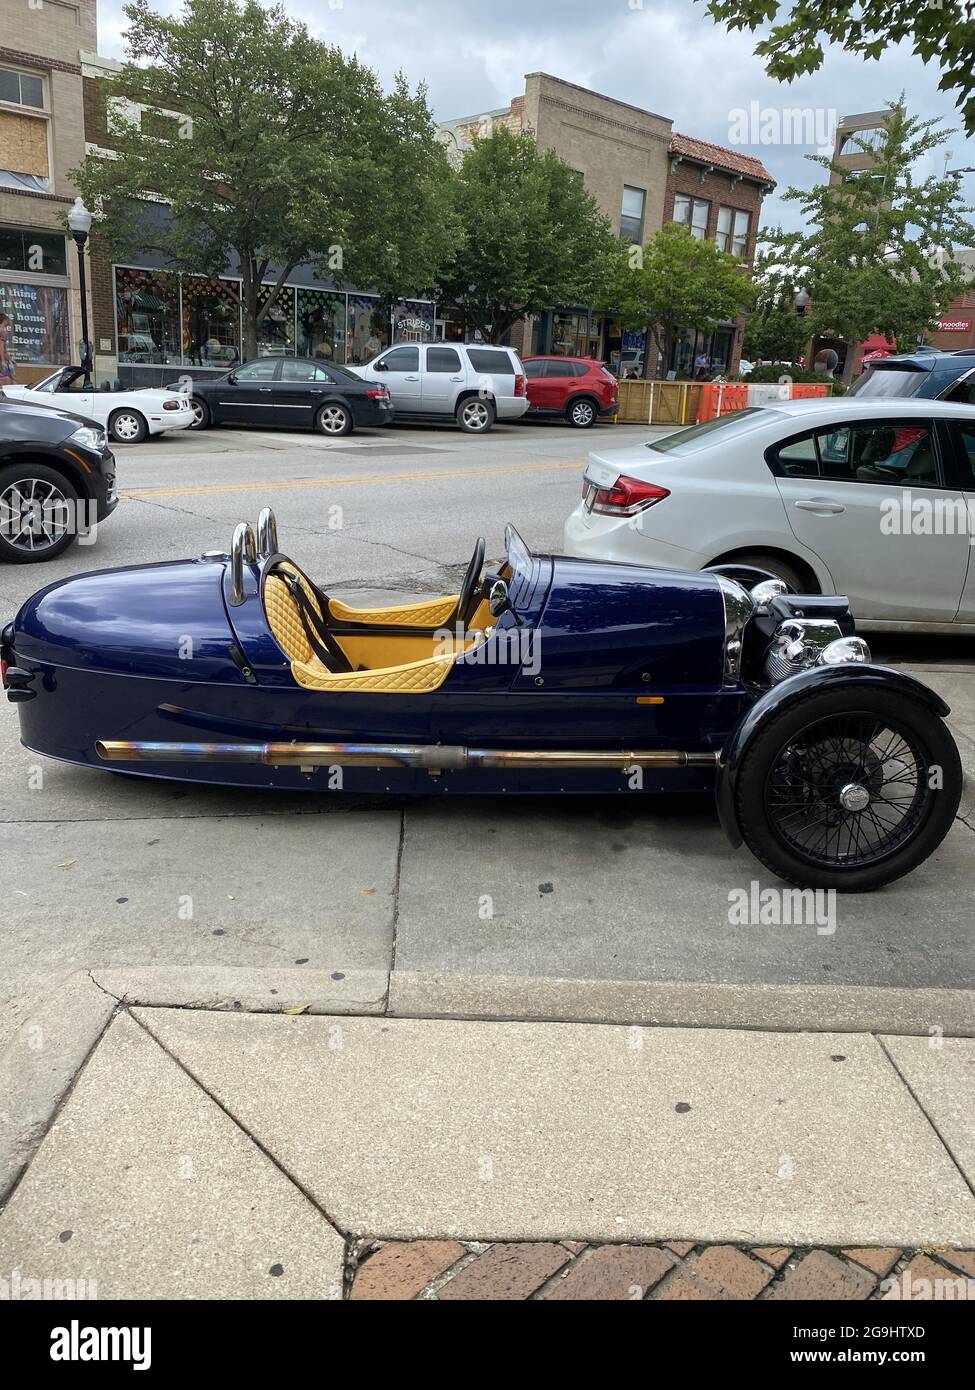 LAWRENCE, UNITED STATES - Jul 10, 2021: A vertical shot of a Morgan three-wheeler classic car-motorcycle at the Mass Street in Lawrence, USA Stock Photo